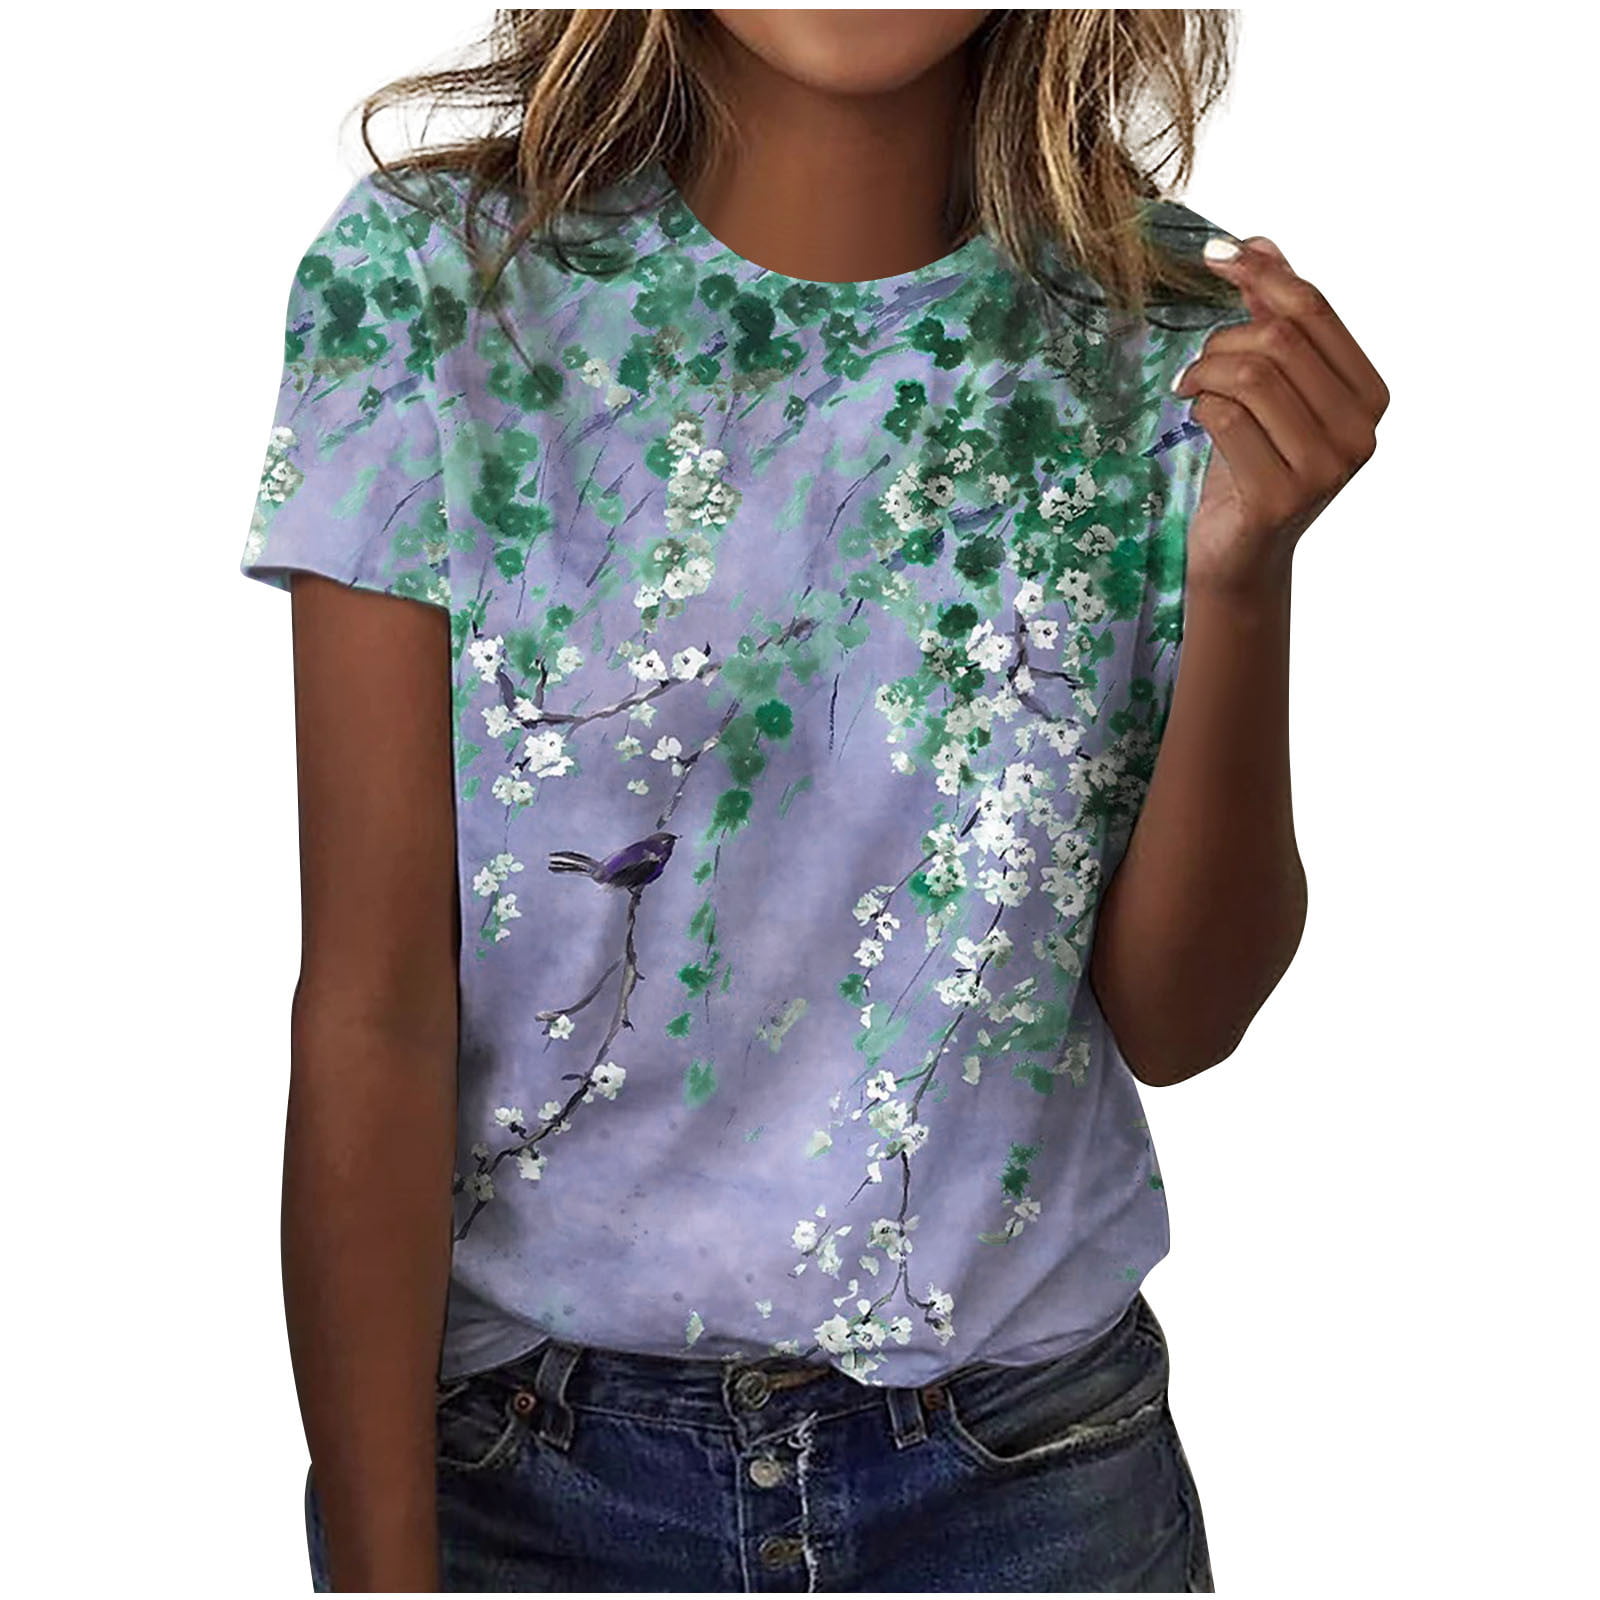 Cute Summer Tops for Women Plus Size Tops Crew Neck Floral Print Short  Sleeve T-Shirt Tops Casual Loose Blouse Tops 